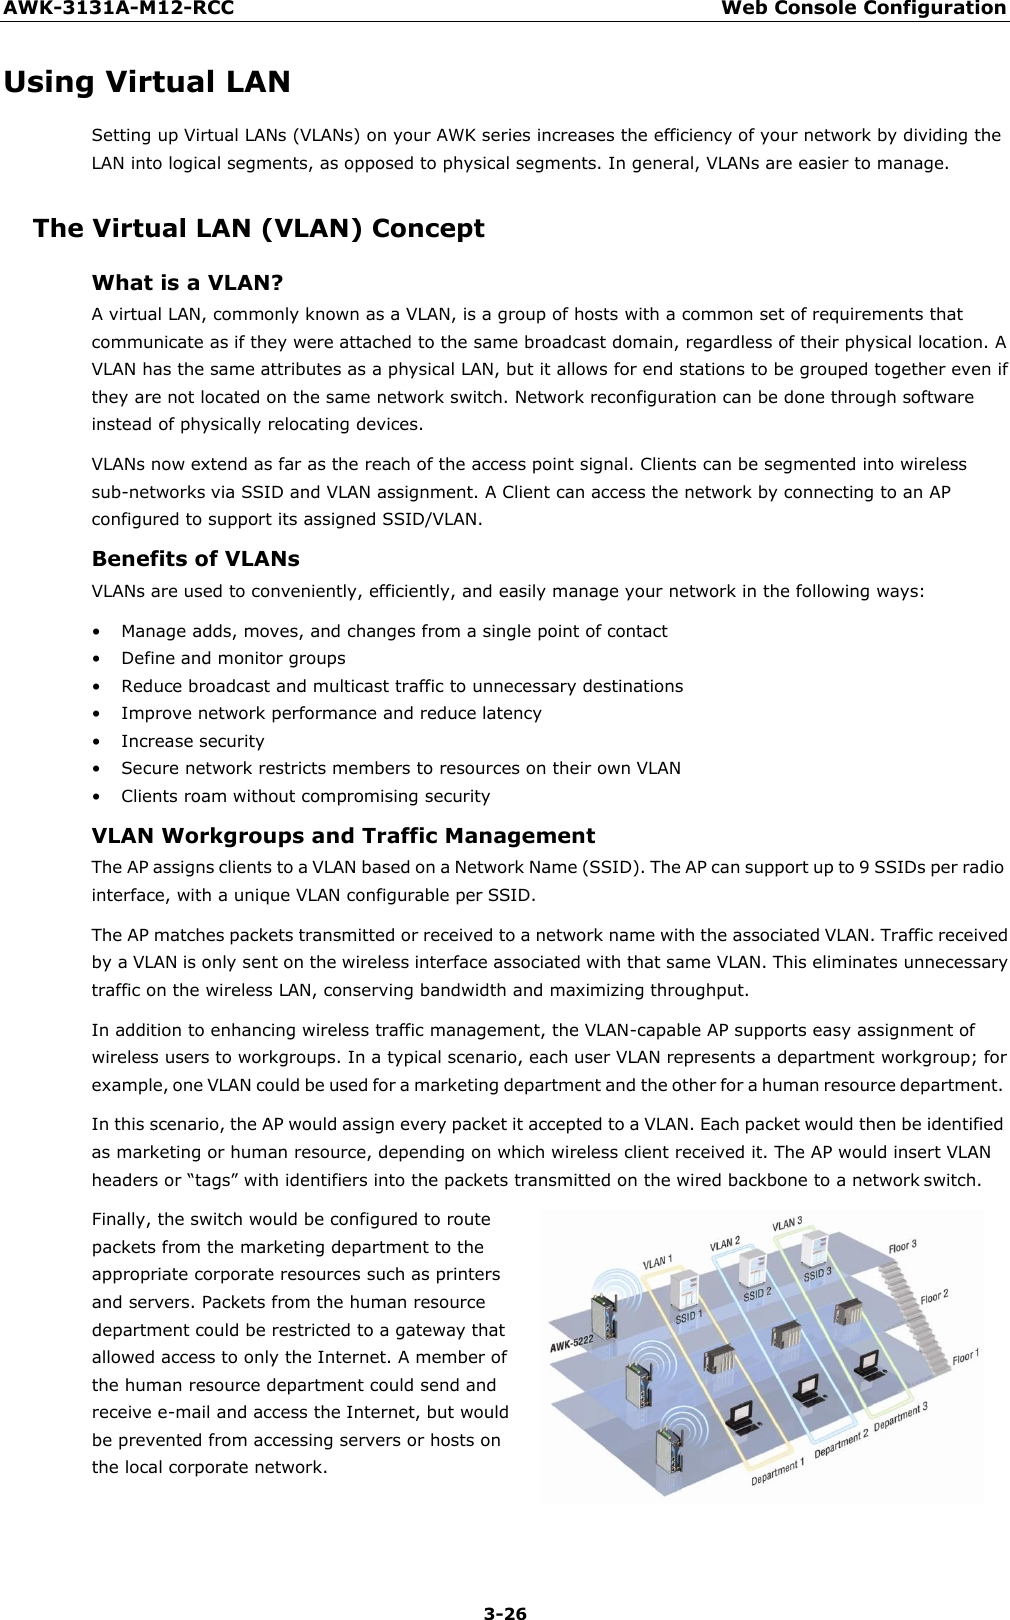 AWK-3131A-M12-RCC Web Console Configuration 3-26    Using Virtual LAN Setting up Virtual LANs (VLANs) on your AWK series increases the efficiency of your network by dividing the LAN into logical segments, as opposed to physical segments. In general, VLANs are easier to manage.  The Virtual LAN (VLAN) Concept What is a VLAN? A virtual LAN, commonly known as a VLAN, is a group of hosts with a common set of requirements that communicate as if they were attached to the same broadcast domain, regardless of their physical location. A VLAN has the same attributes as a physical LAN, but it allows for end stations to be grouped together even if they are not located on the same network switch. Network reconfiguration can be done through software instead of physically relocating devices. VLANs now extend as far as the reach of the access point signal. Clients can be segmented into wireless sub-networks via SSID and VLAN assignment. A Client can access the network by connecting to an AP configured to support its assigned SSID/VLAN. Benefits of VLANs VLANs are used to conveniently, efficiently, and easily manage your network in the following ways:  • Manage adds, moves, and changes from a single point of contact • Define and monitor groups • Reduce broadcast and multicast traffic to unnecessary destinations • Improve network performance and reduce latency • Increase security • Secure network restricts members to resources on their own VLAN • Clients roam without compromising security VLAN Workgroups and Traffic Management The AP assigns clients to a VLAN based on a Network Name (SSID). The AP can support up to 9 SSIDs per radio interface, with a unique VLAN configurable per SSID. The AP matches packets transmitted or received to a network name with the associated VLAN. Traffic received by a VLAN is only sent on the wireless interface associated with that same VLAN. This eliminates unnecessary traffic on the wireless LAN, conserving bandwidth and maximizing throughput. In addition to enhancing wireless traffic management, the VLAN-capable AP supports easy assignment of wireless users to workgroups. In a typical scenario, each user VLAN represents a department workgroup; for example, one VLAN could be used for a marketing department and the other for a human resource department. In this scenario, the AP would assign every packet it accepted to a VLAN. Each packet would then be identified as marketing or human resource, depending on which wireless client received it. The AP would insert VLAN headers or “tags” with identifiers into the packets transmitted on the wired backbone to a network switch. Finally, the switch would be configured to route packets from the marketing department to the appropriate corporate resources such as printers and servers. Packets from the human resource department could be restricted to a gateway that allowed access to only the Internet. A member of the human resource department could send and receive e-mail and access the Internet, but would be prevented from accessing servers or hosts on the local corporate network. 